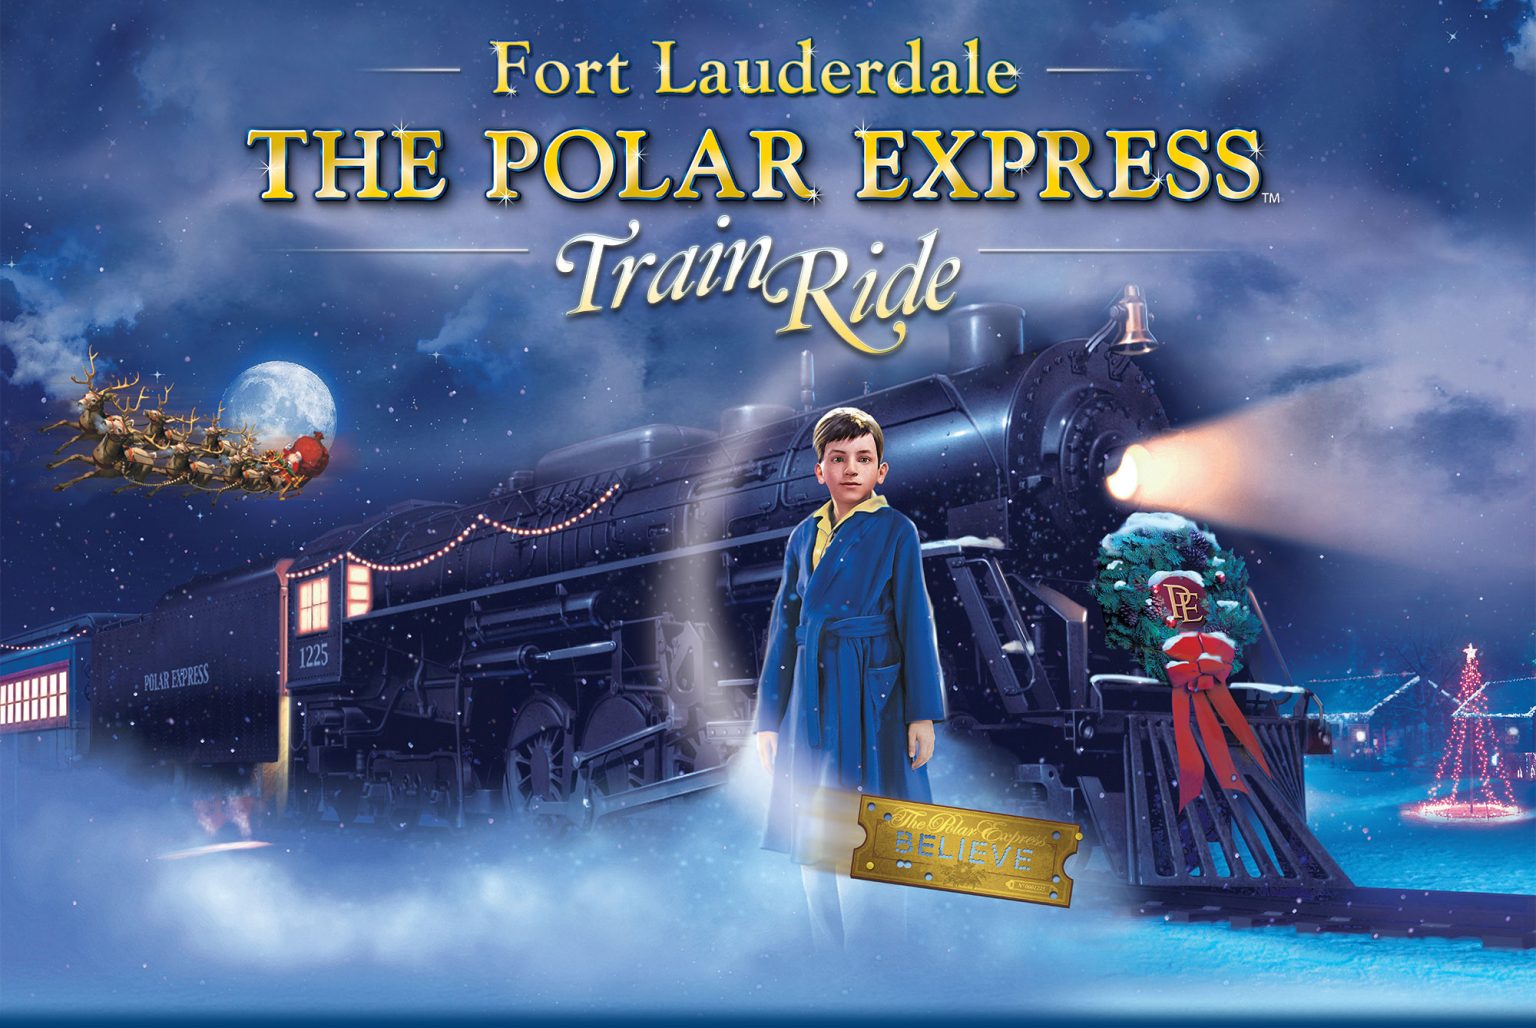 The Polar Express in Fort Lauderdale • Christina All Day